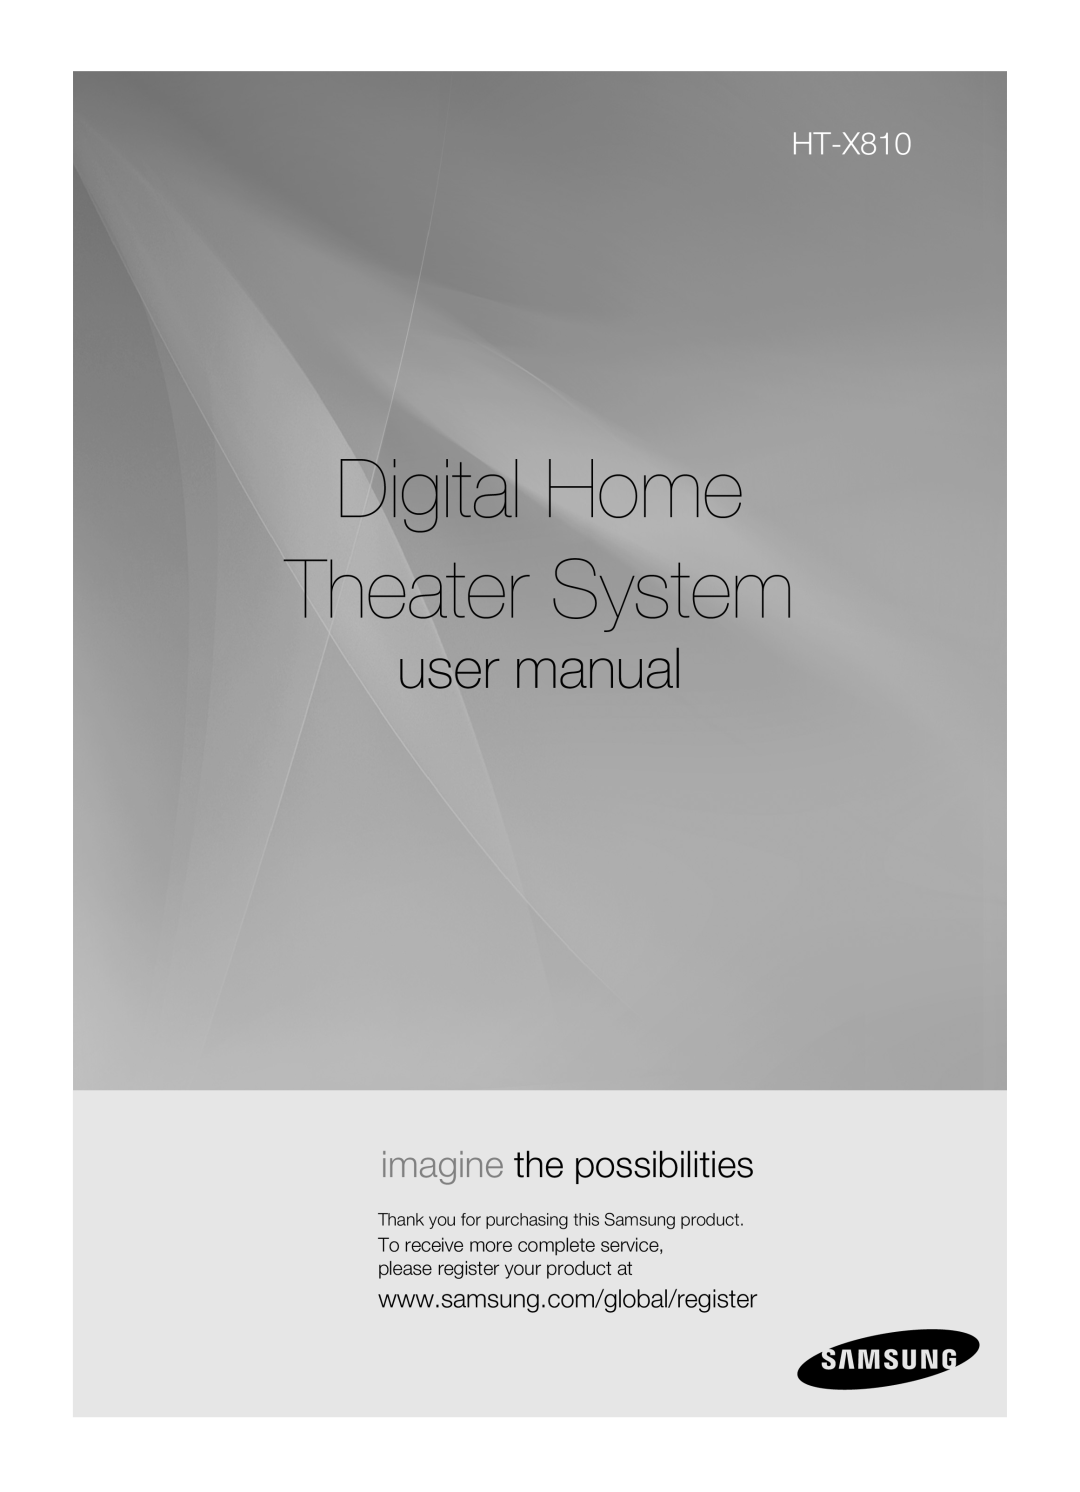 Samsung HT-X810 user manual Digital Home Theater System, imagine the possibilities 